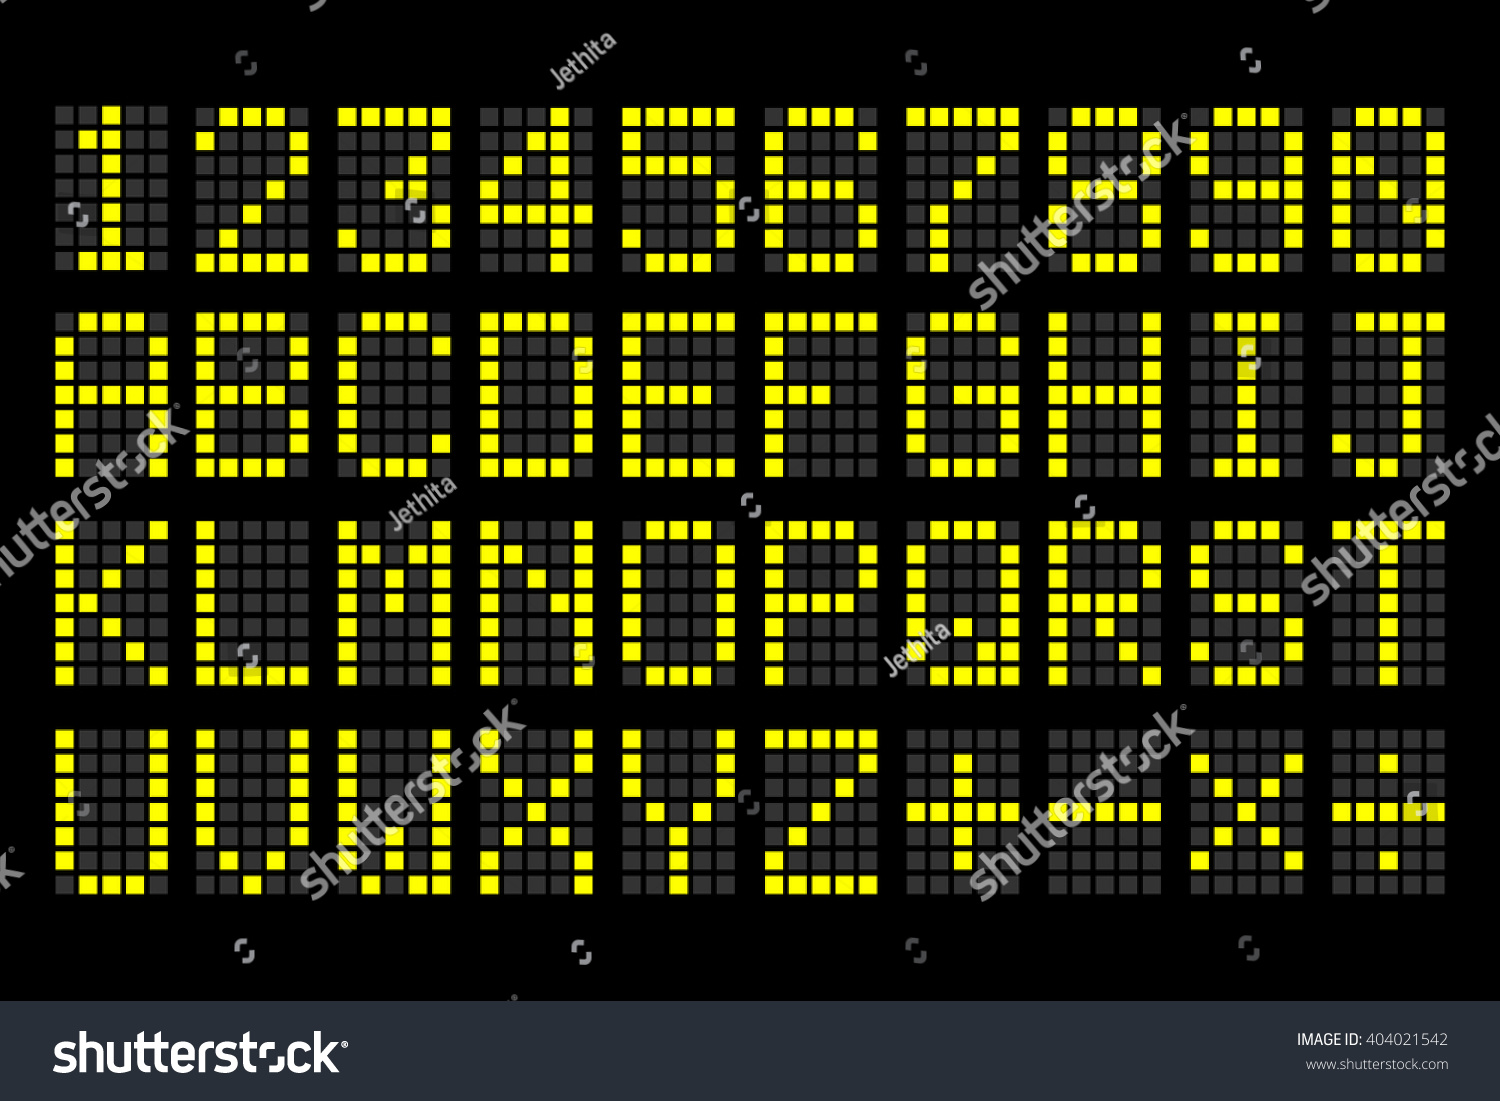 SVG of digital yellow letters and numbers display board for airport schedules, train timetables, scoreboard etc. svg